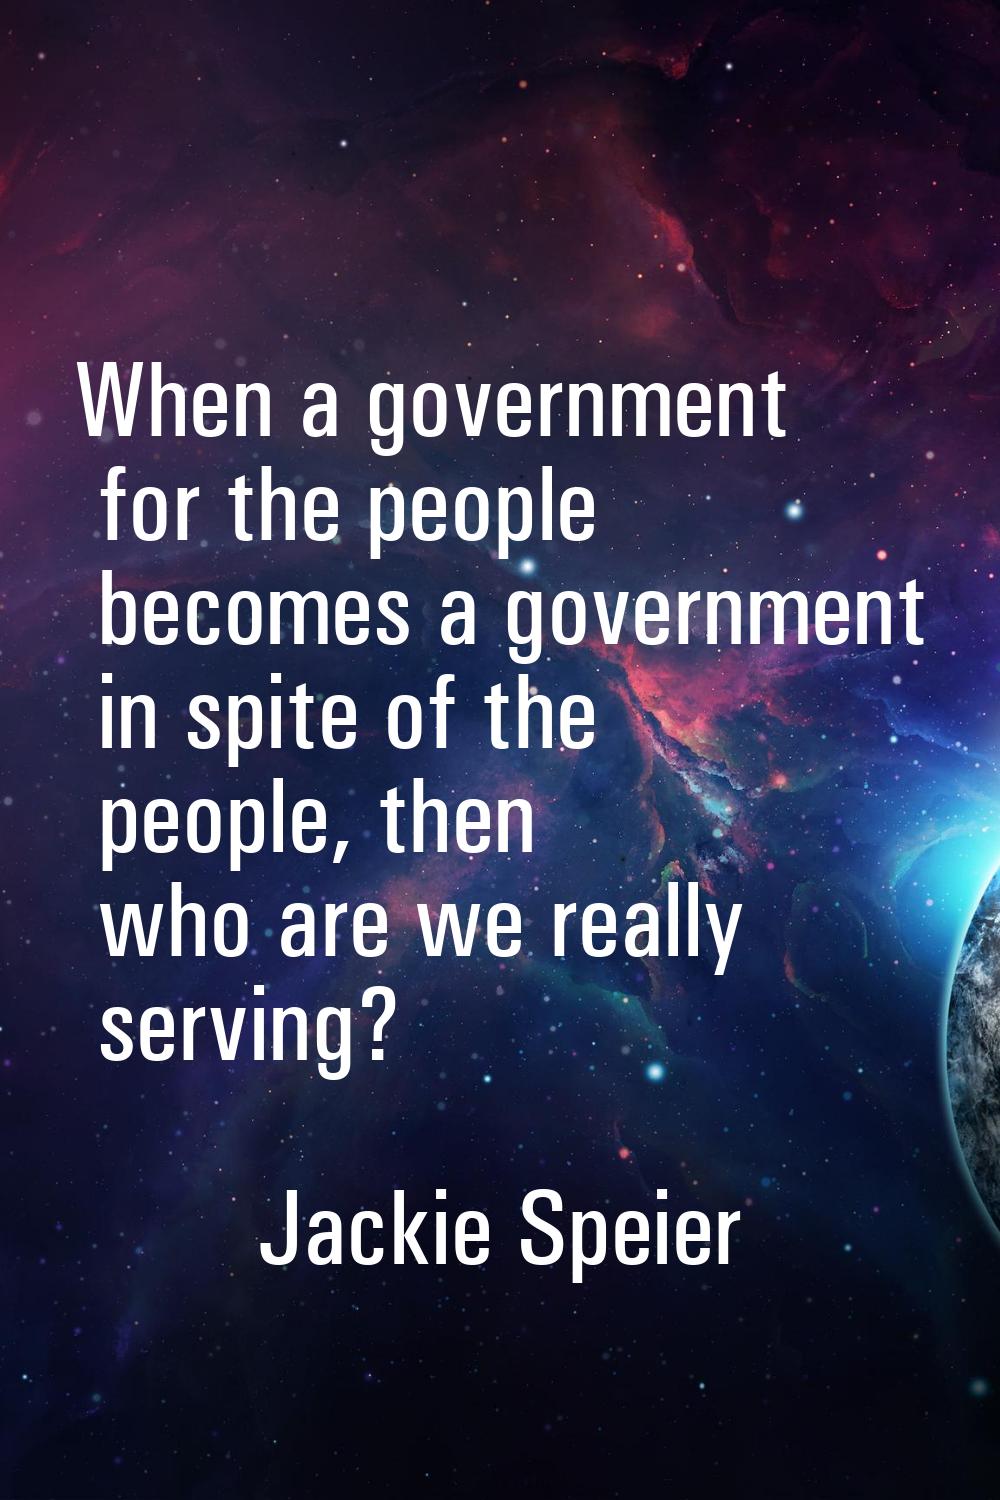 When a government for the people becomes a government in spite of the people, then who are we reall